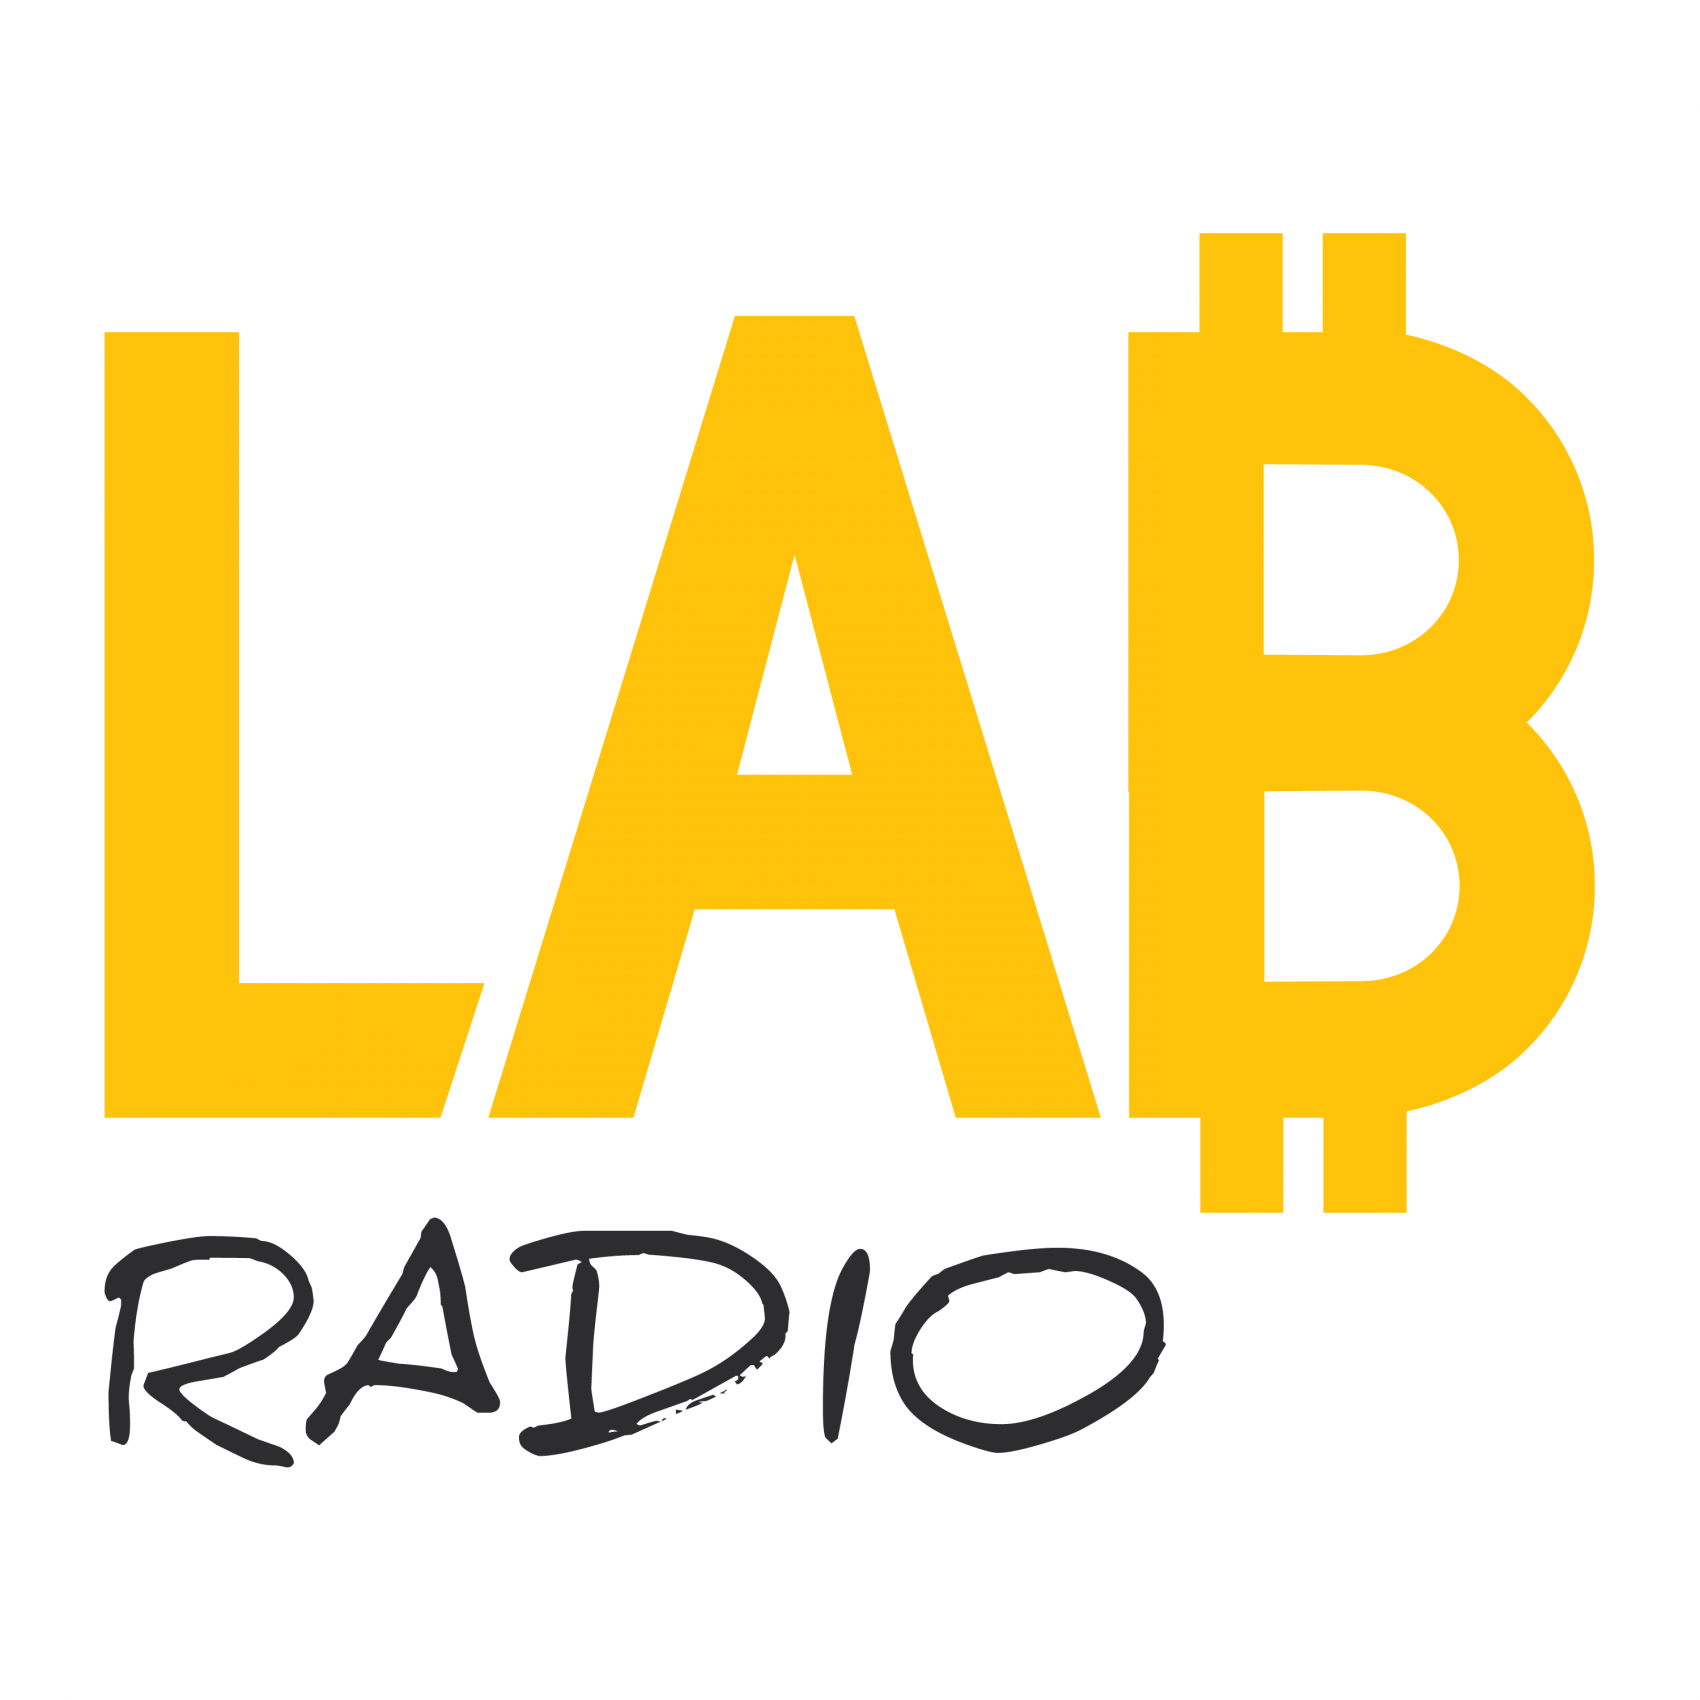 LAB Radio logo (yellow and black letters and white background)